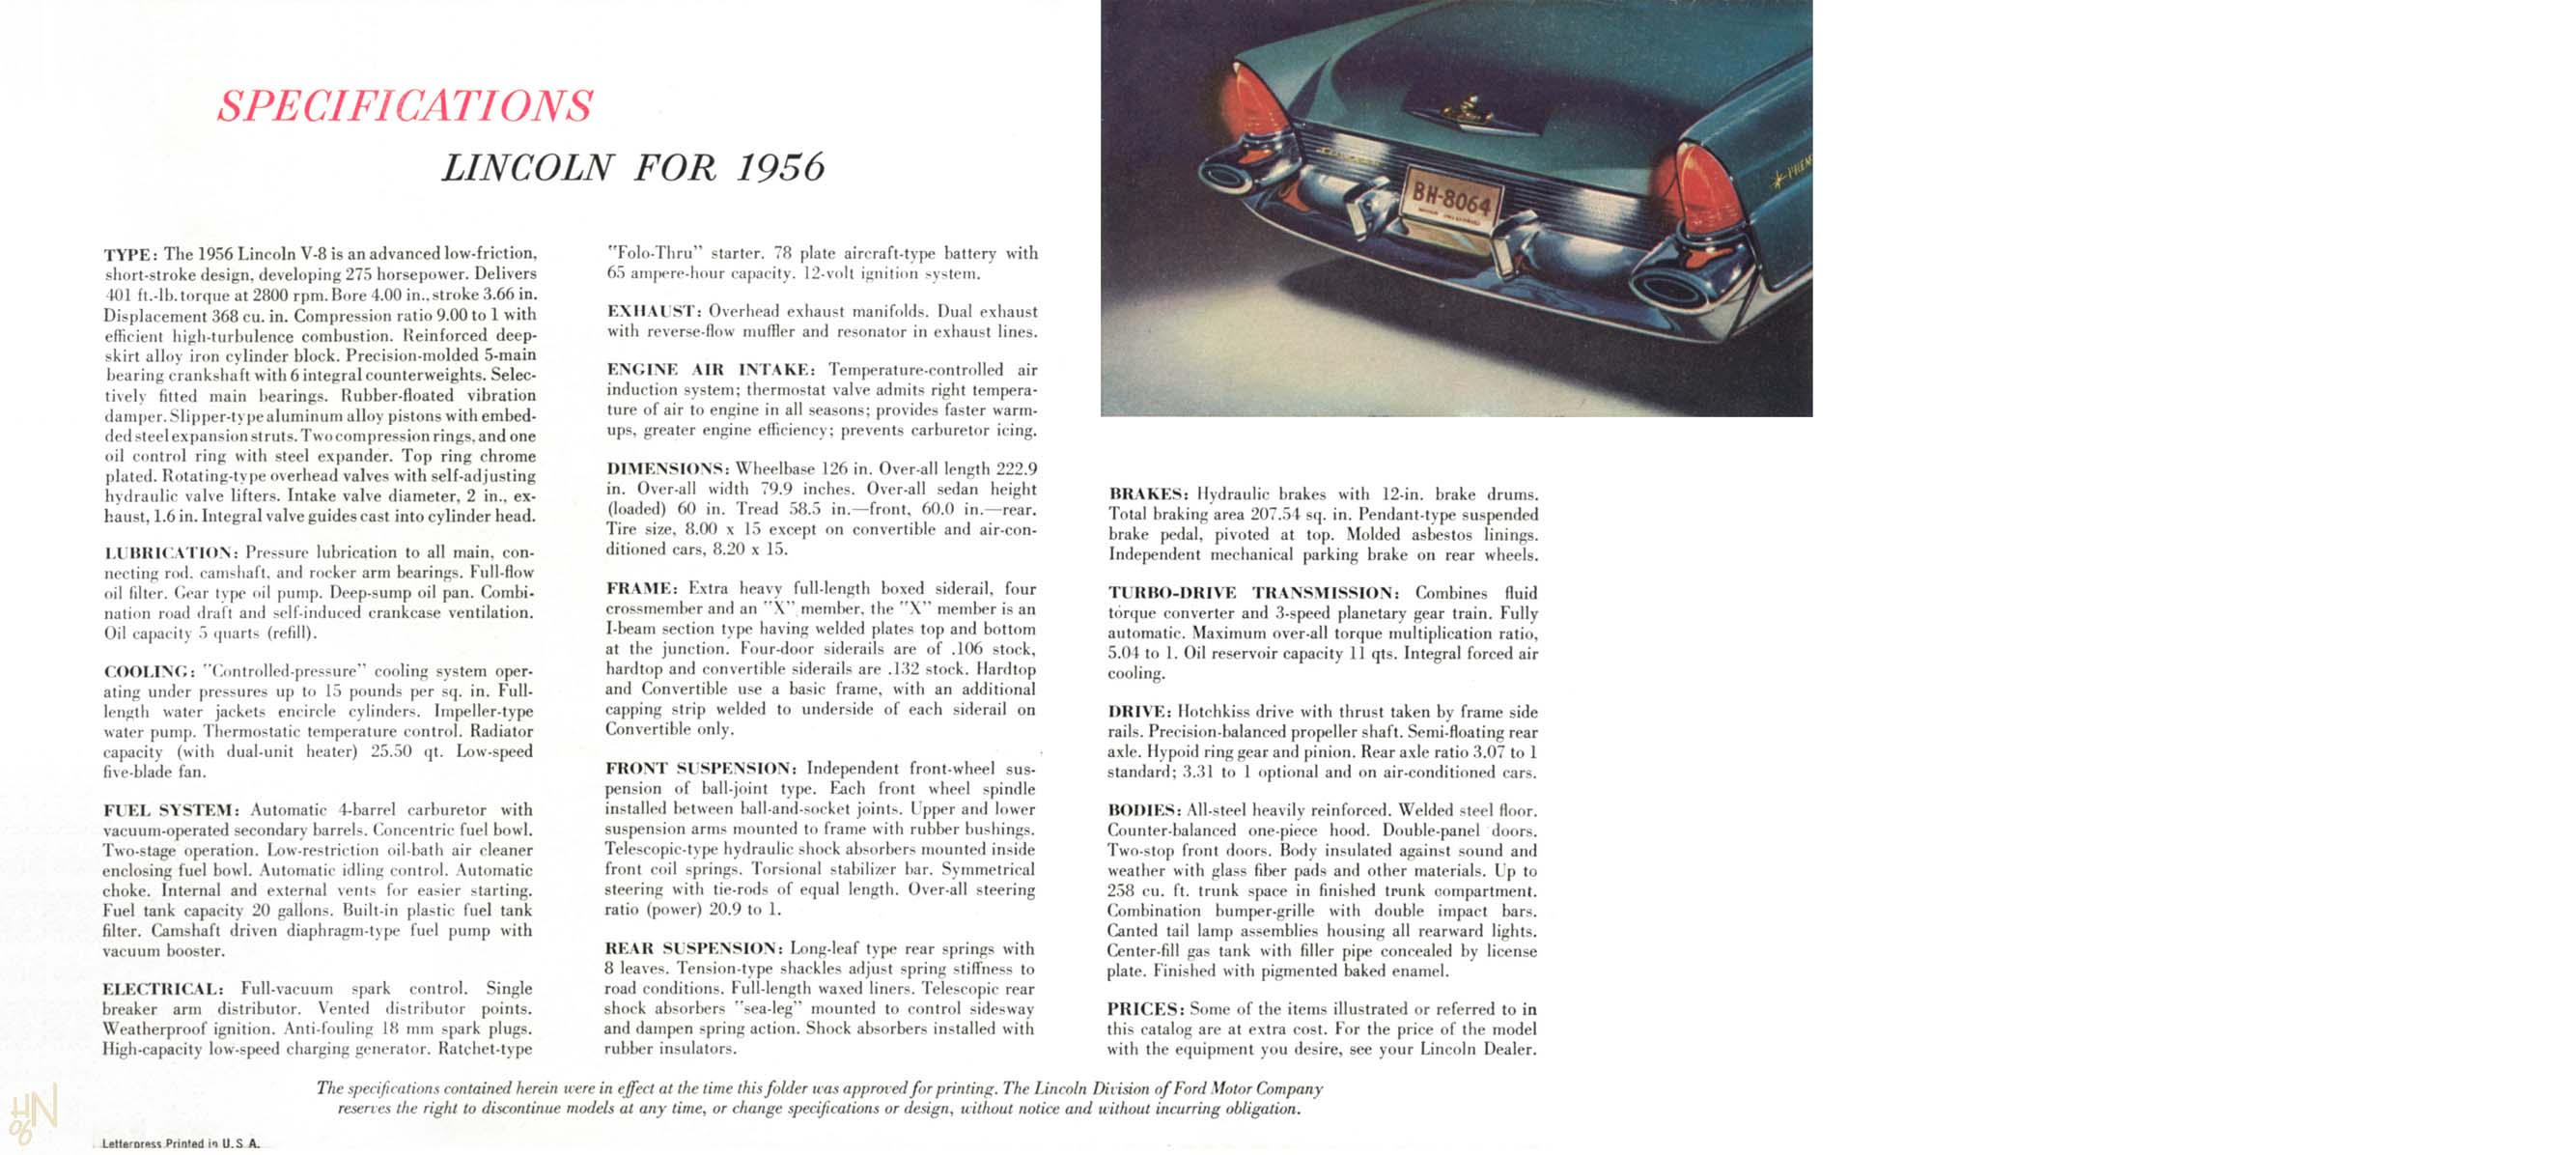 1956 Lincoln Brochure Page 1